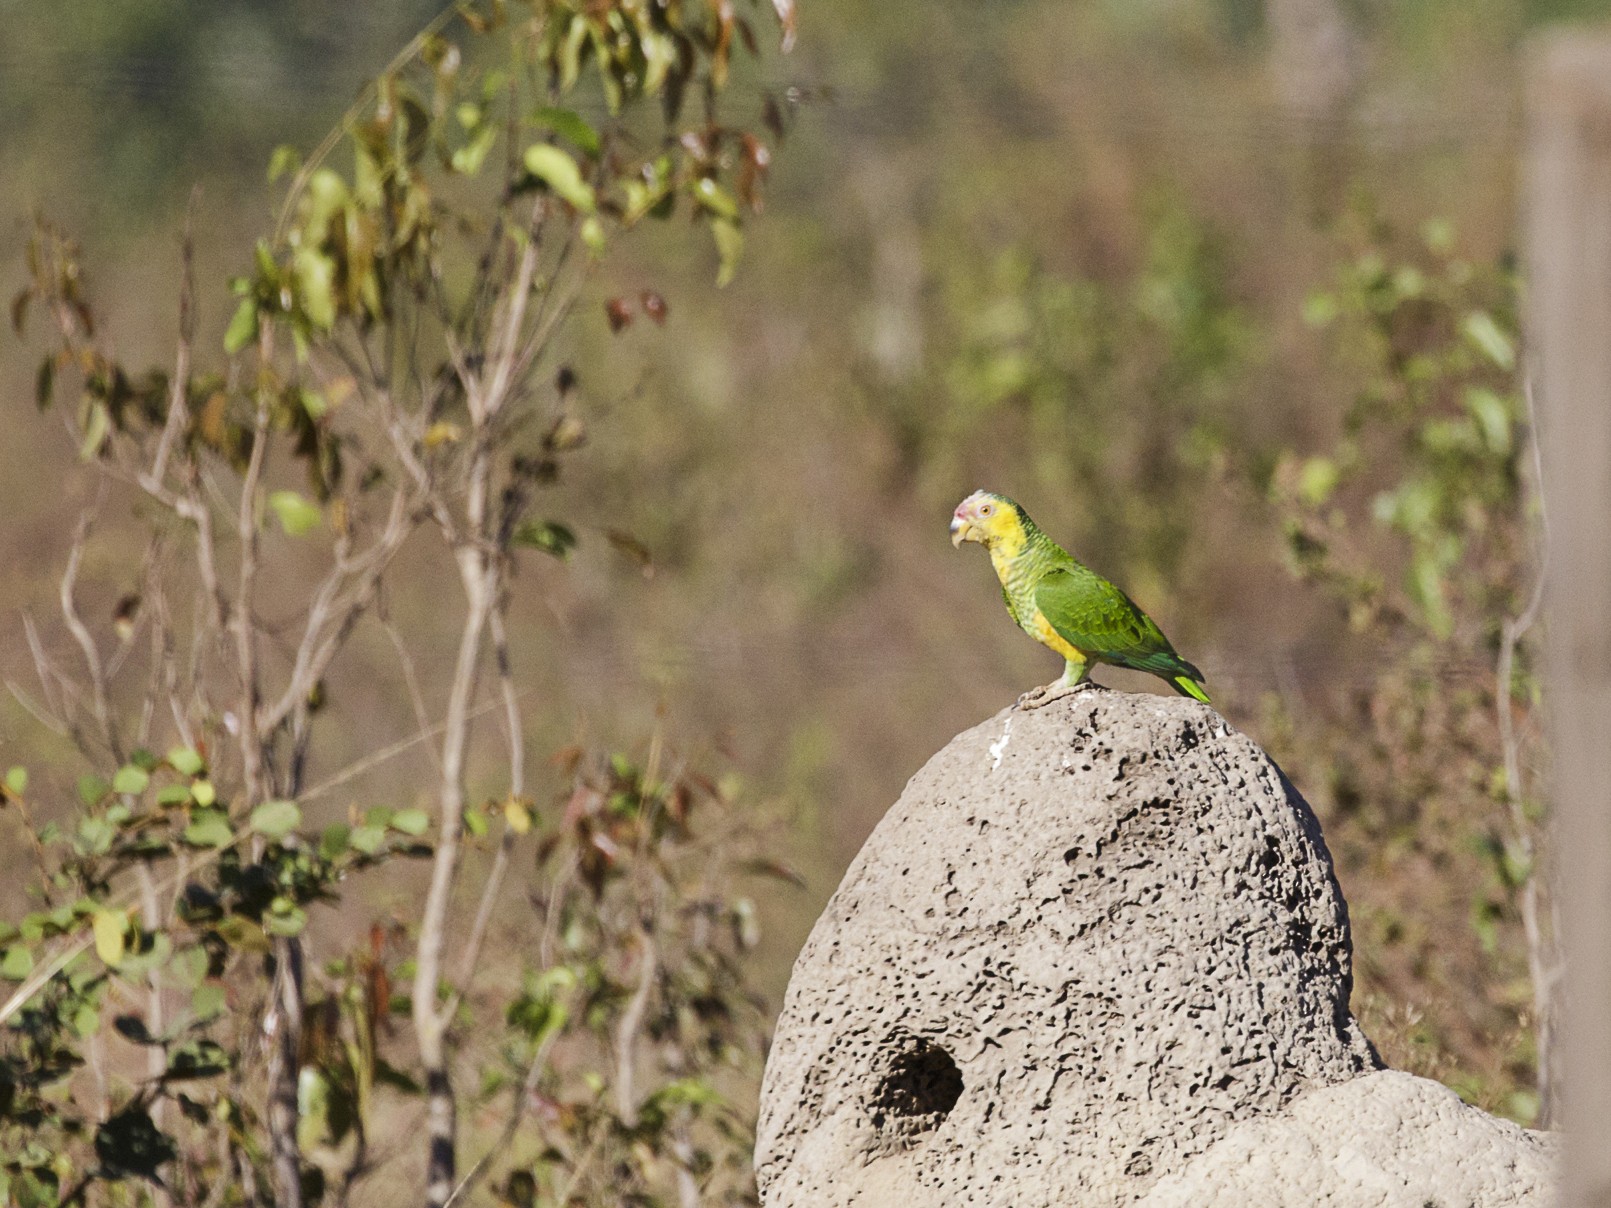 Yellow-faced Parrot - Silvia Faustino Linhares